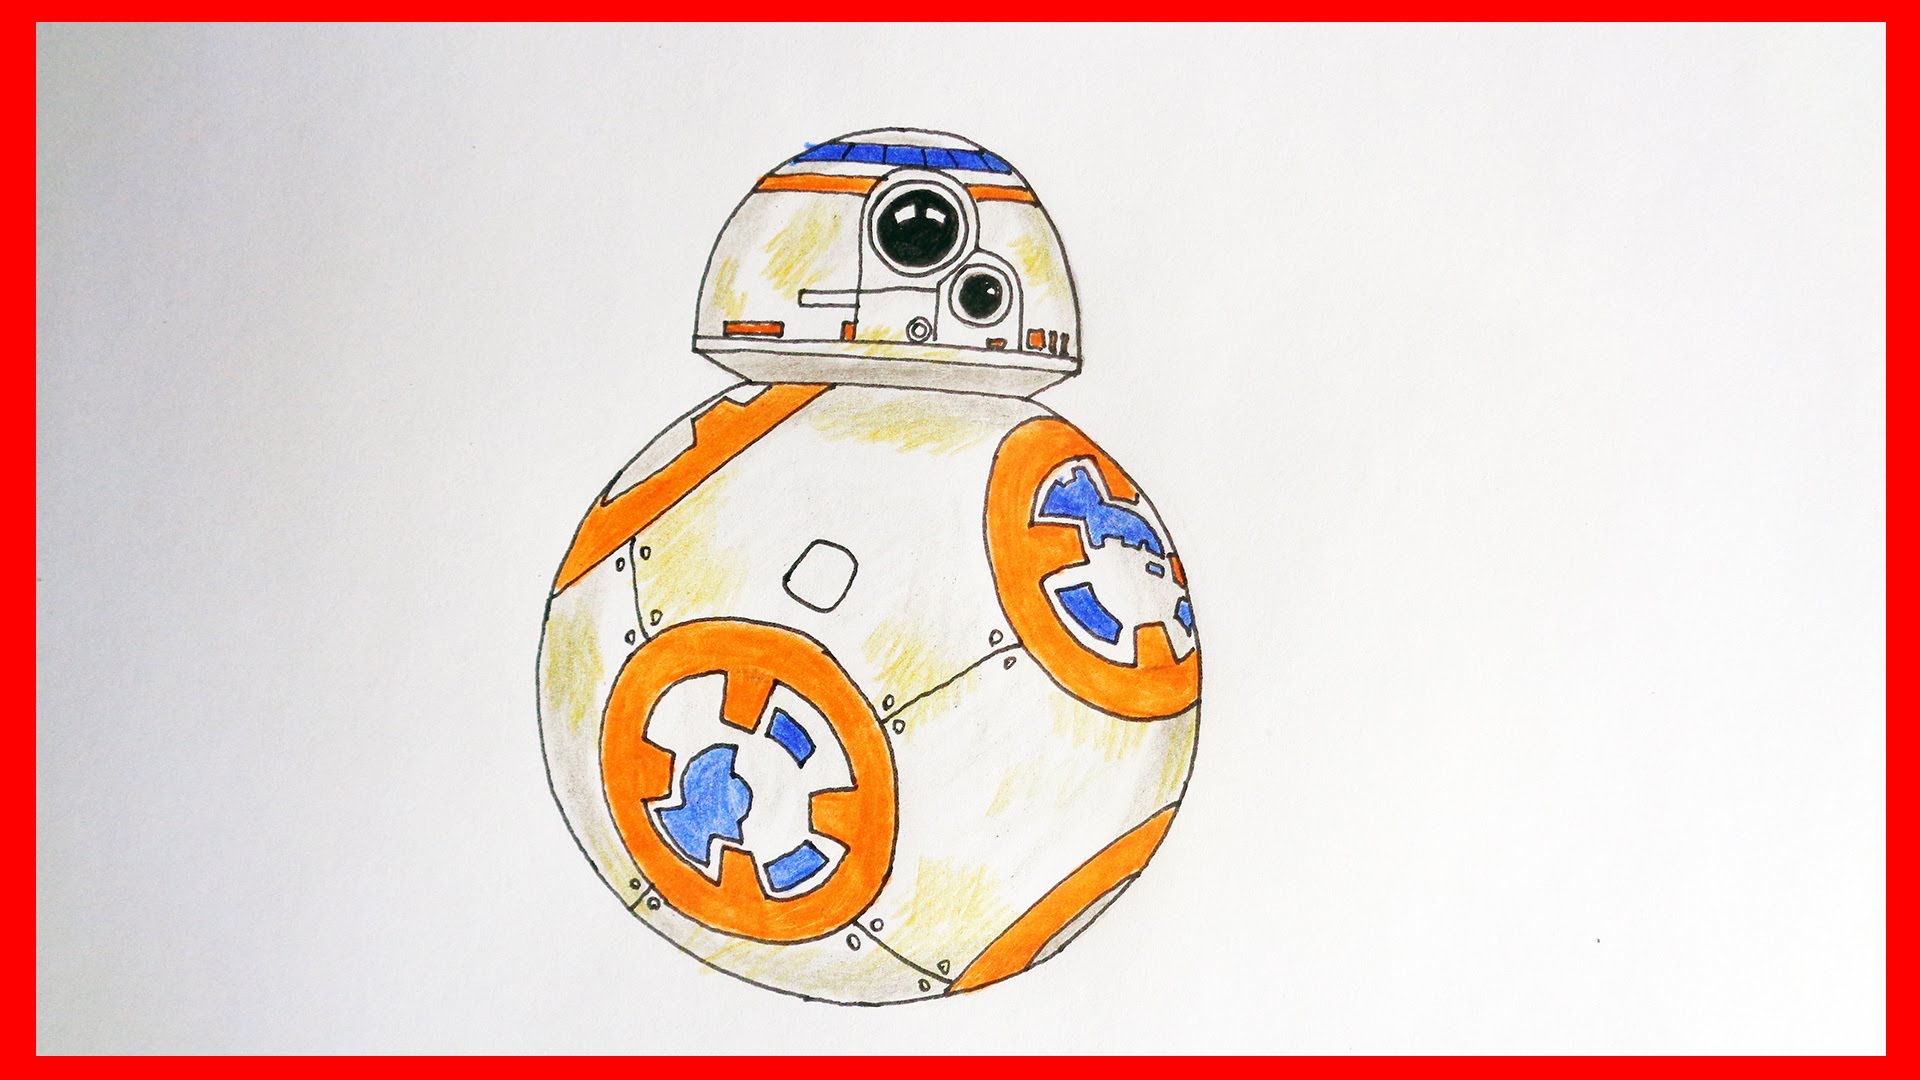 1920x1080 How To Draw Droid Bb8, Star Wars Characters.